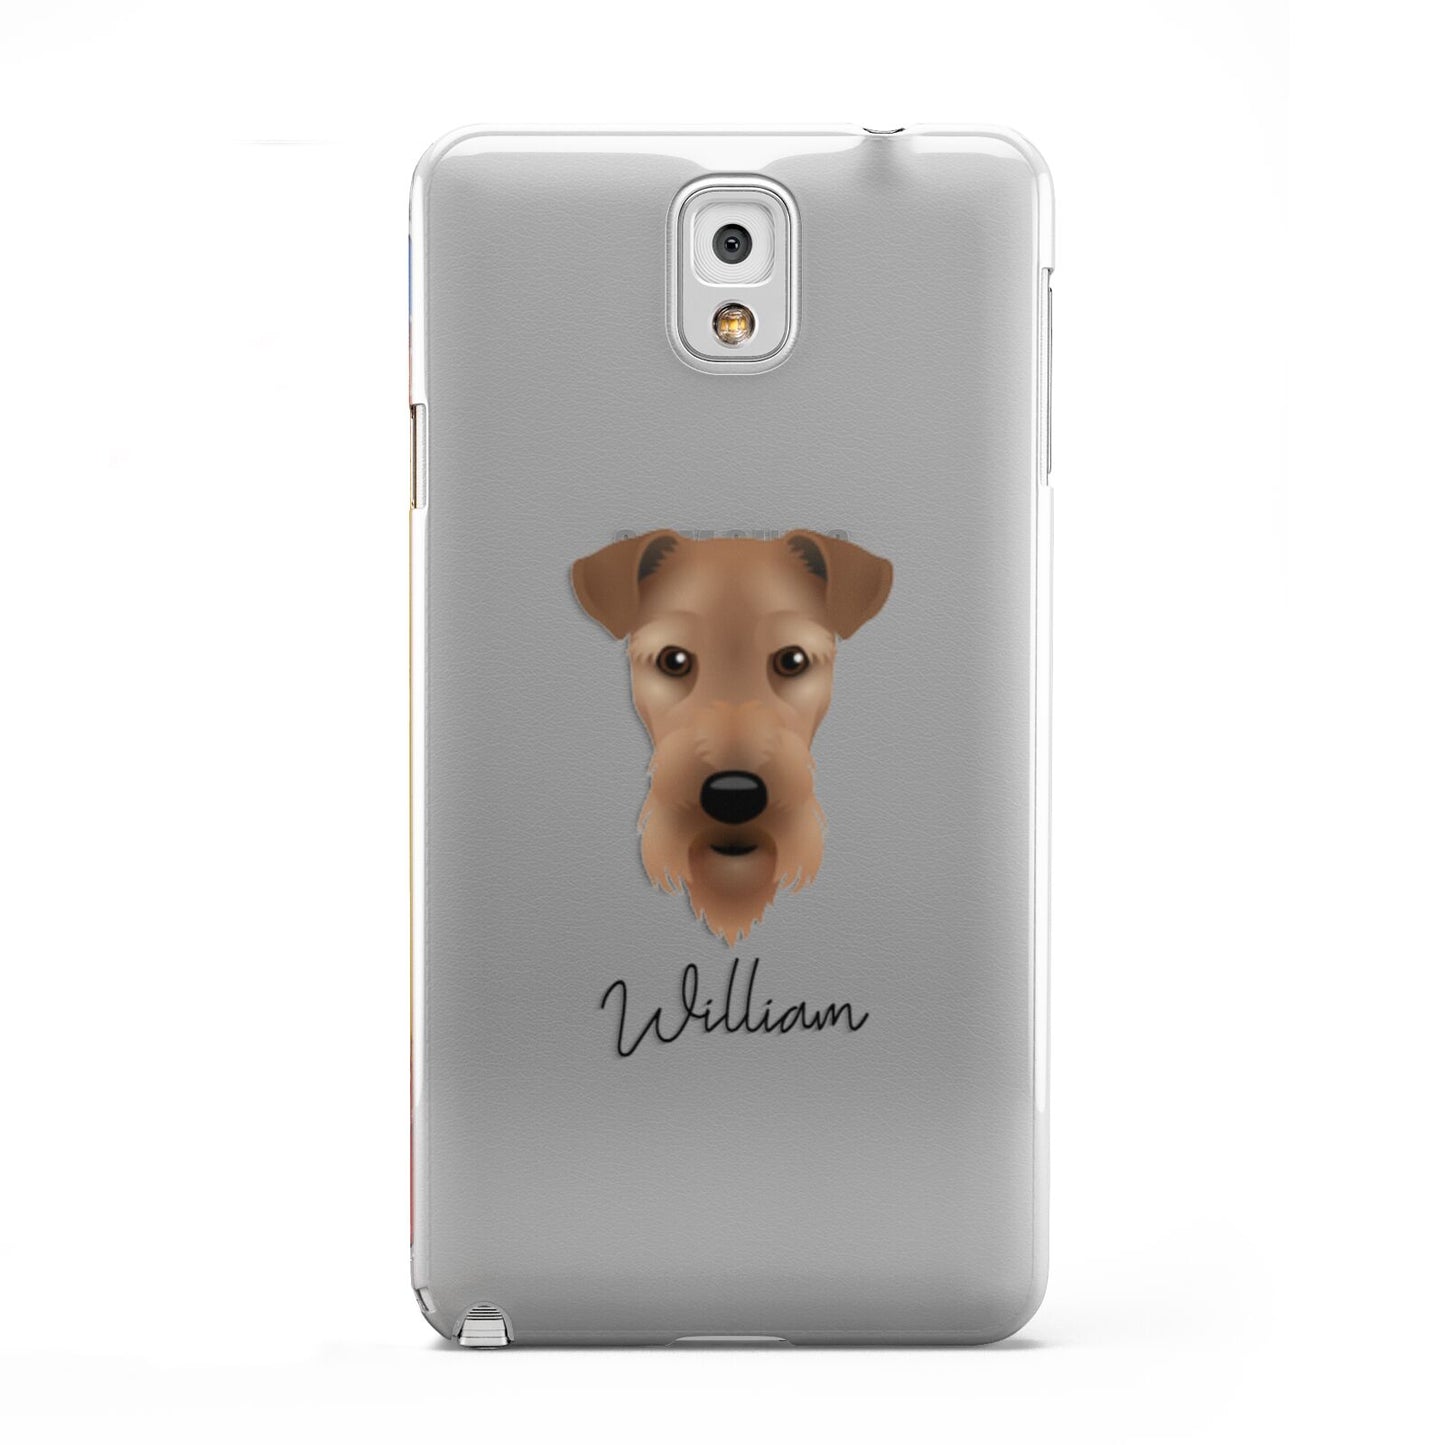 Airedale Terrier Personalised Samsung Galaxy Note 3 Case